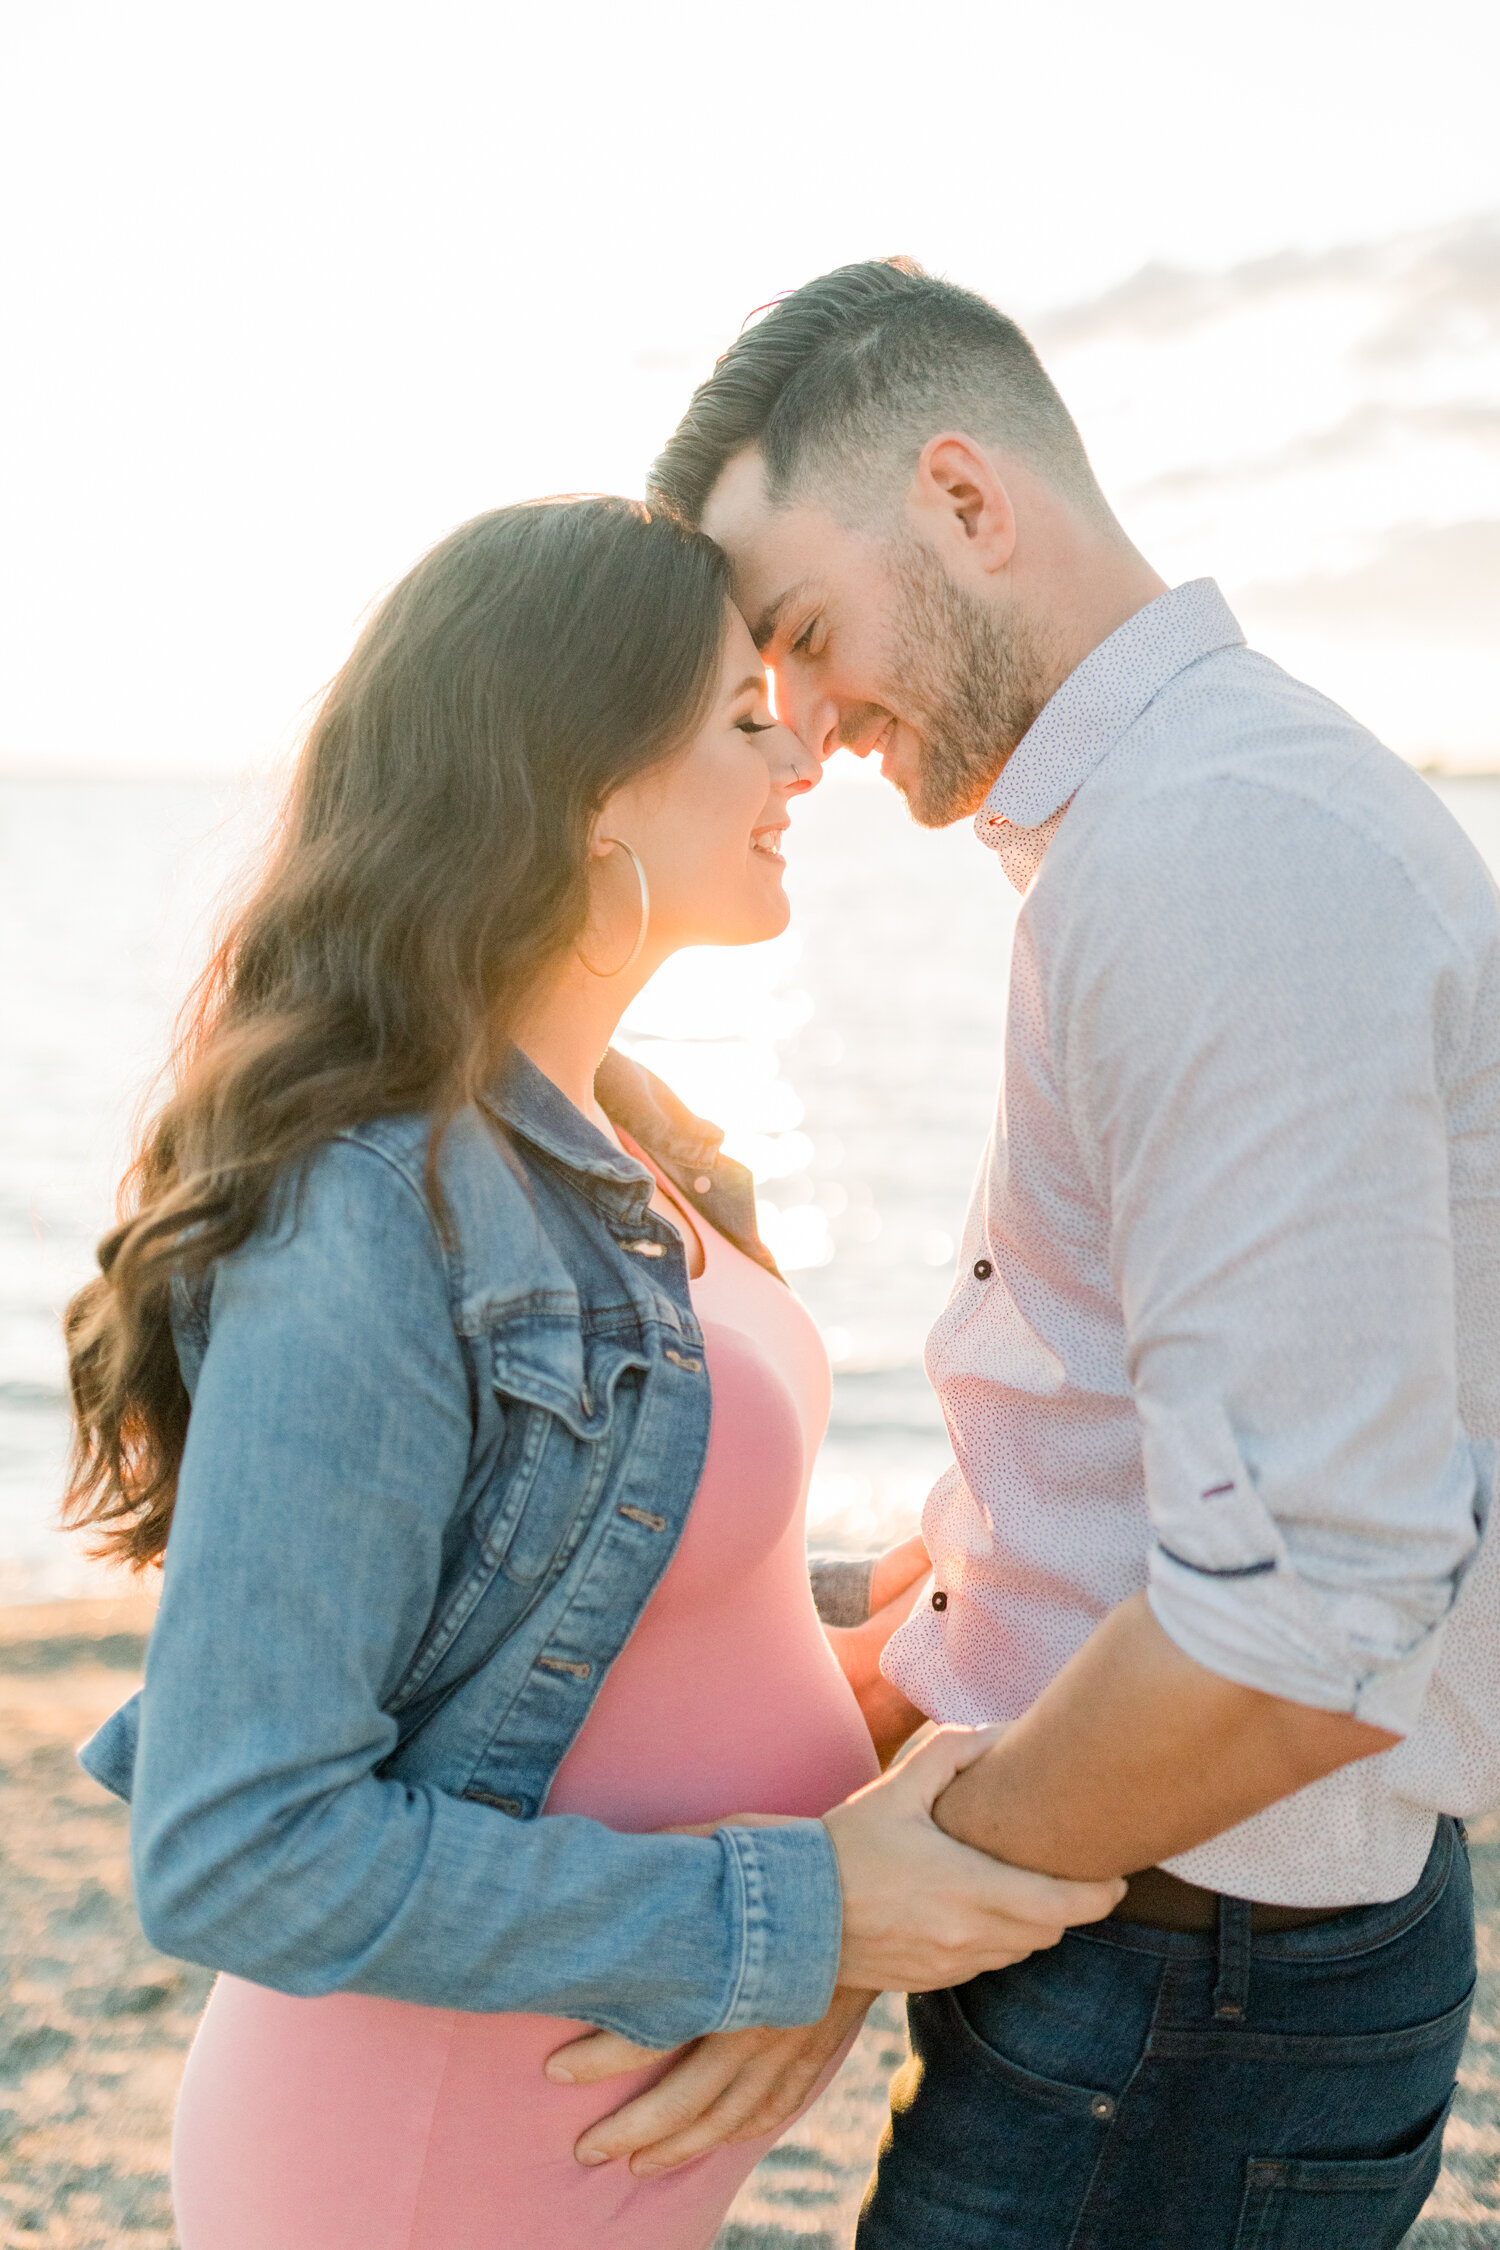  Along the shoreline of Brittania beach in Ottawa, Canada, Chelsea Mason Photography captures this expectant father holding his wife’s stomach. fitted maternity pink dress, womens denim jacket, brittana beach, beach maternity photos, ottawa canada ma